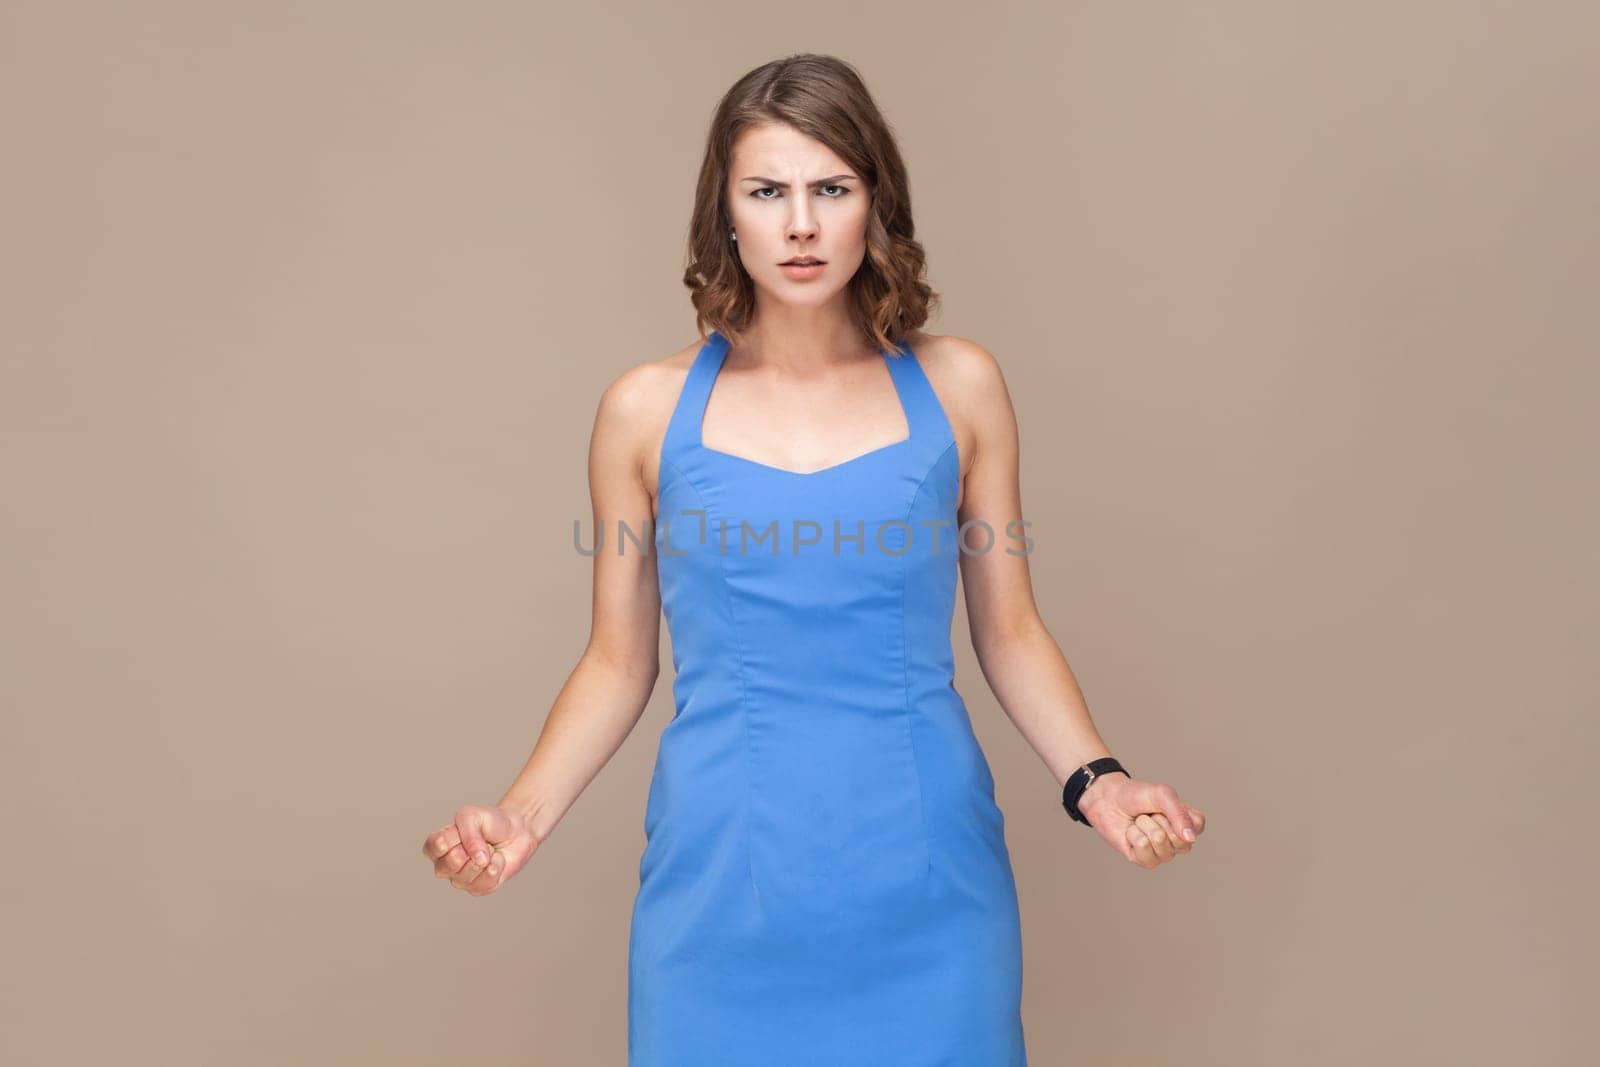 Angry aggressive young adult woman with wavy hair standing with clenched fists, looking at camera with hate and anger, wearing blue dress. Indoor studio shot isolated on light brown background.